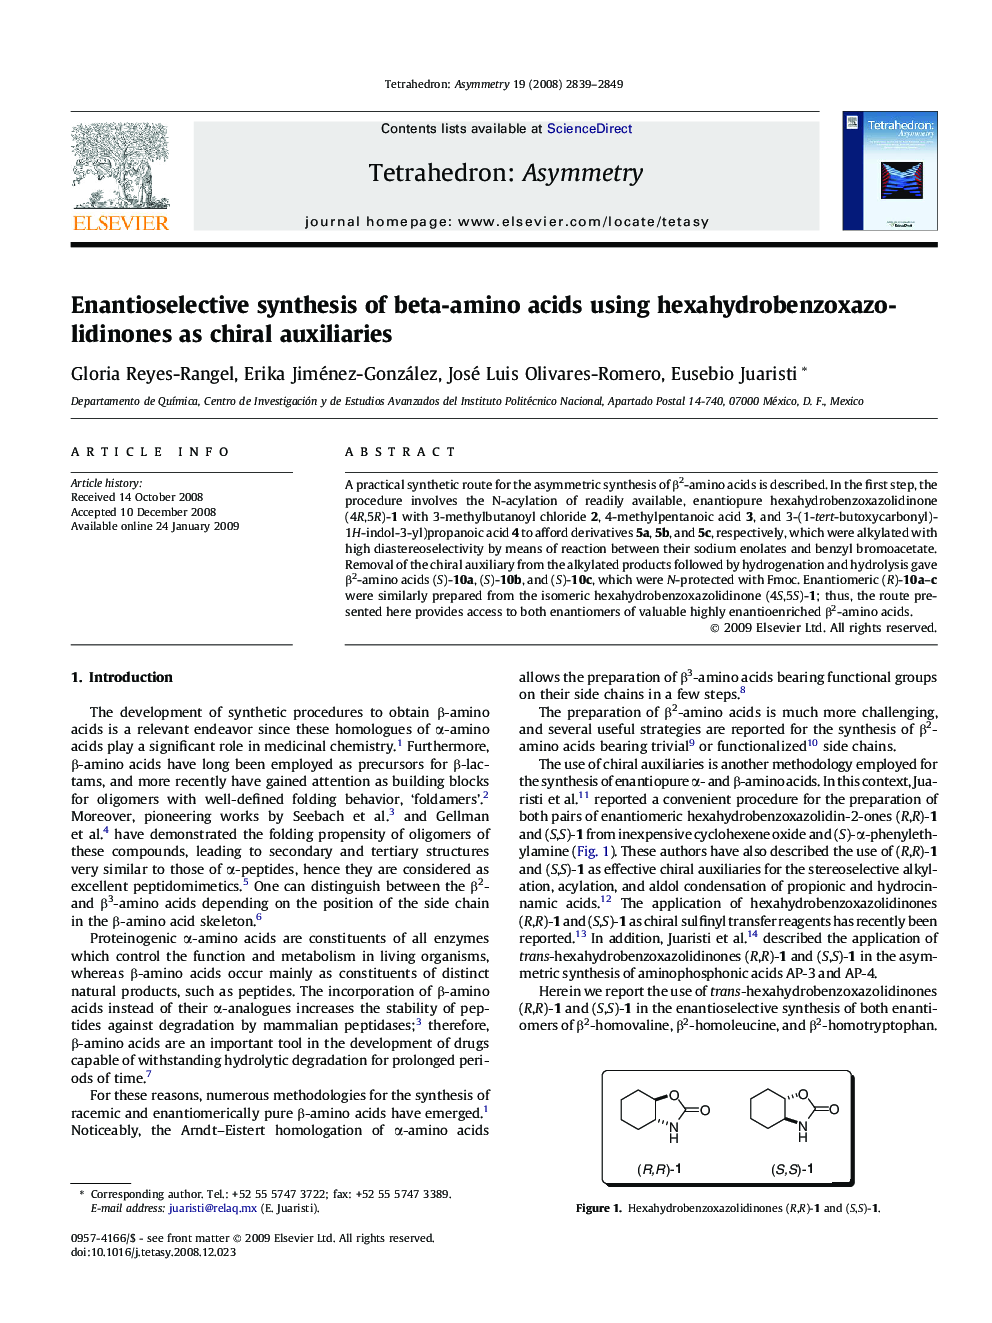 Enantioselective synthesis of beta-amino acids using hexahydrobenzoxazolidinones as chiral auxiliaries